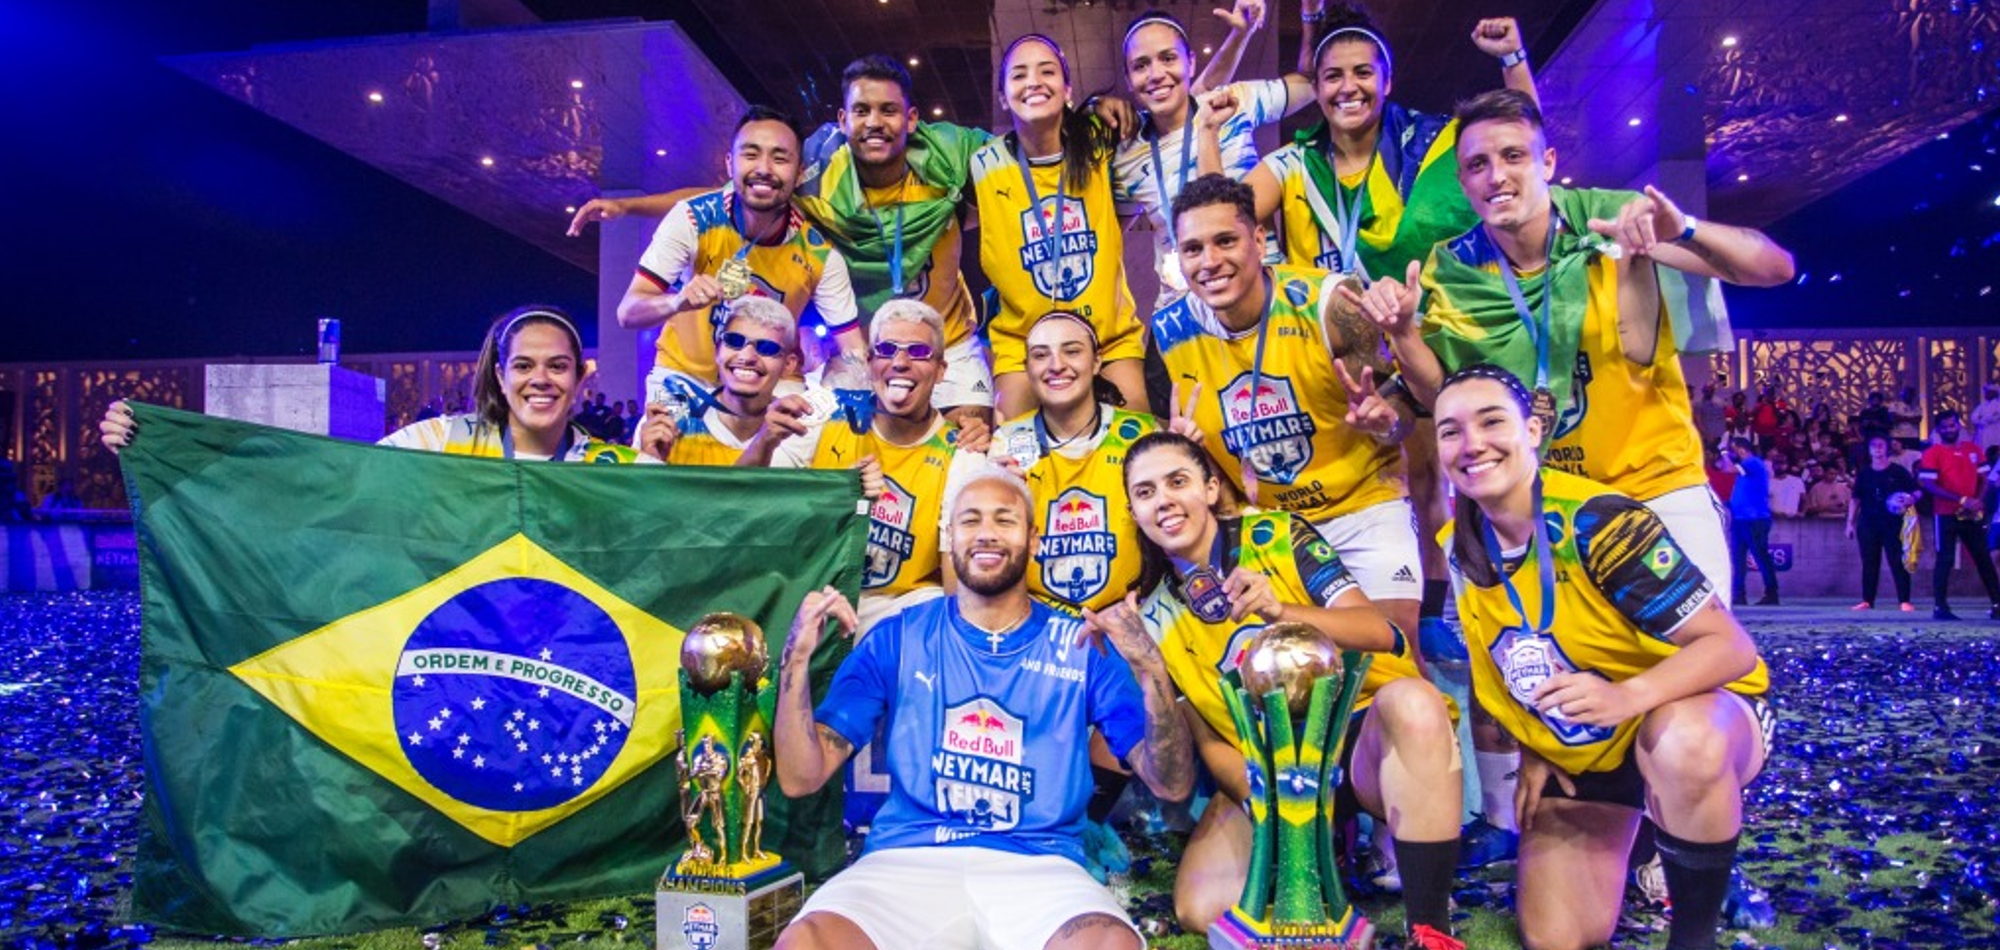 Brazil teams complete clean sweep at Red Bull Neymar Jr’s Five World Final